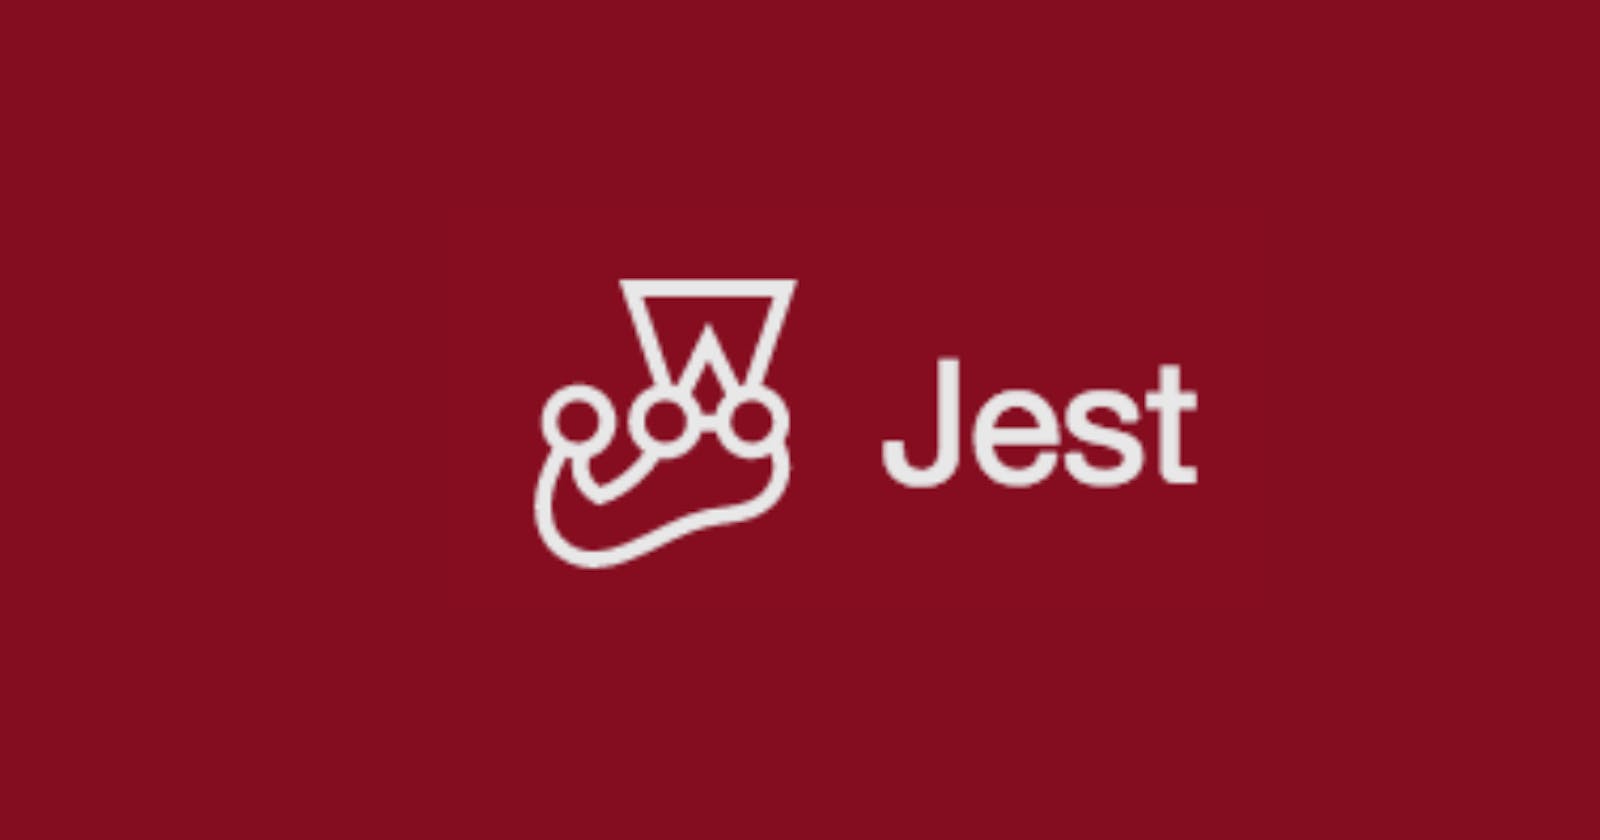 Writing Unit Tests in Javascript Using JEST